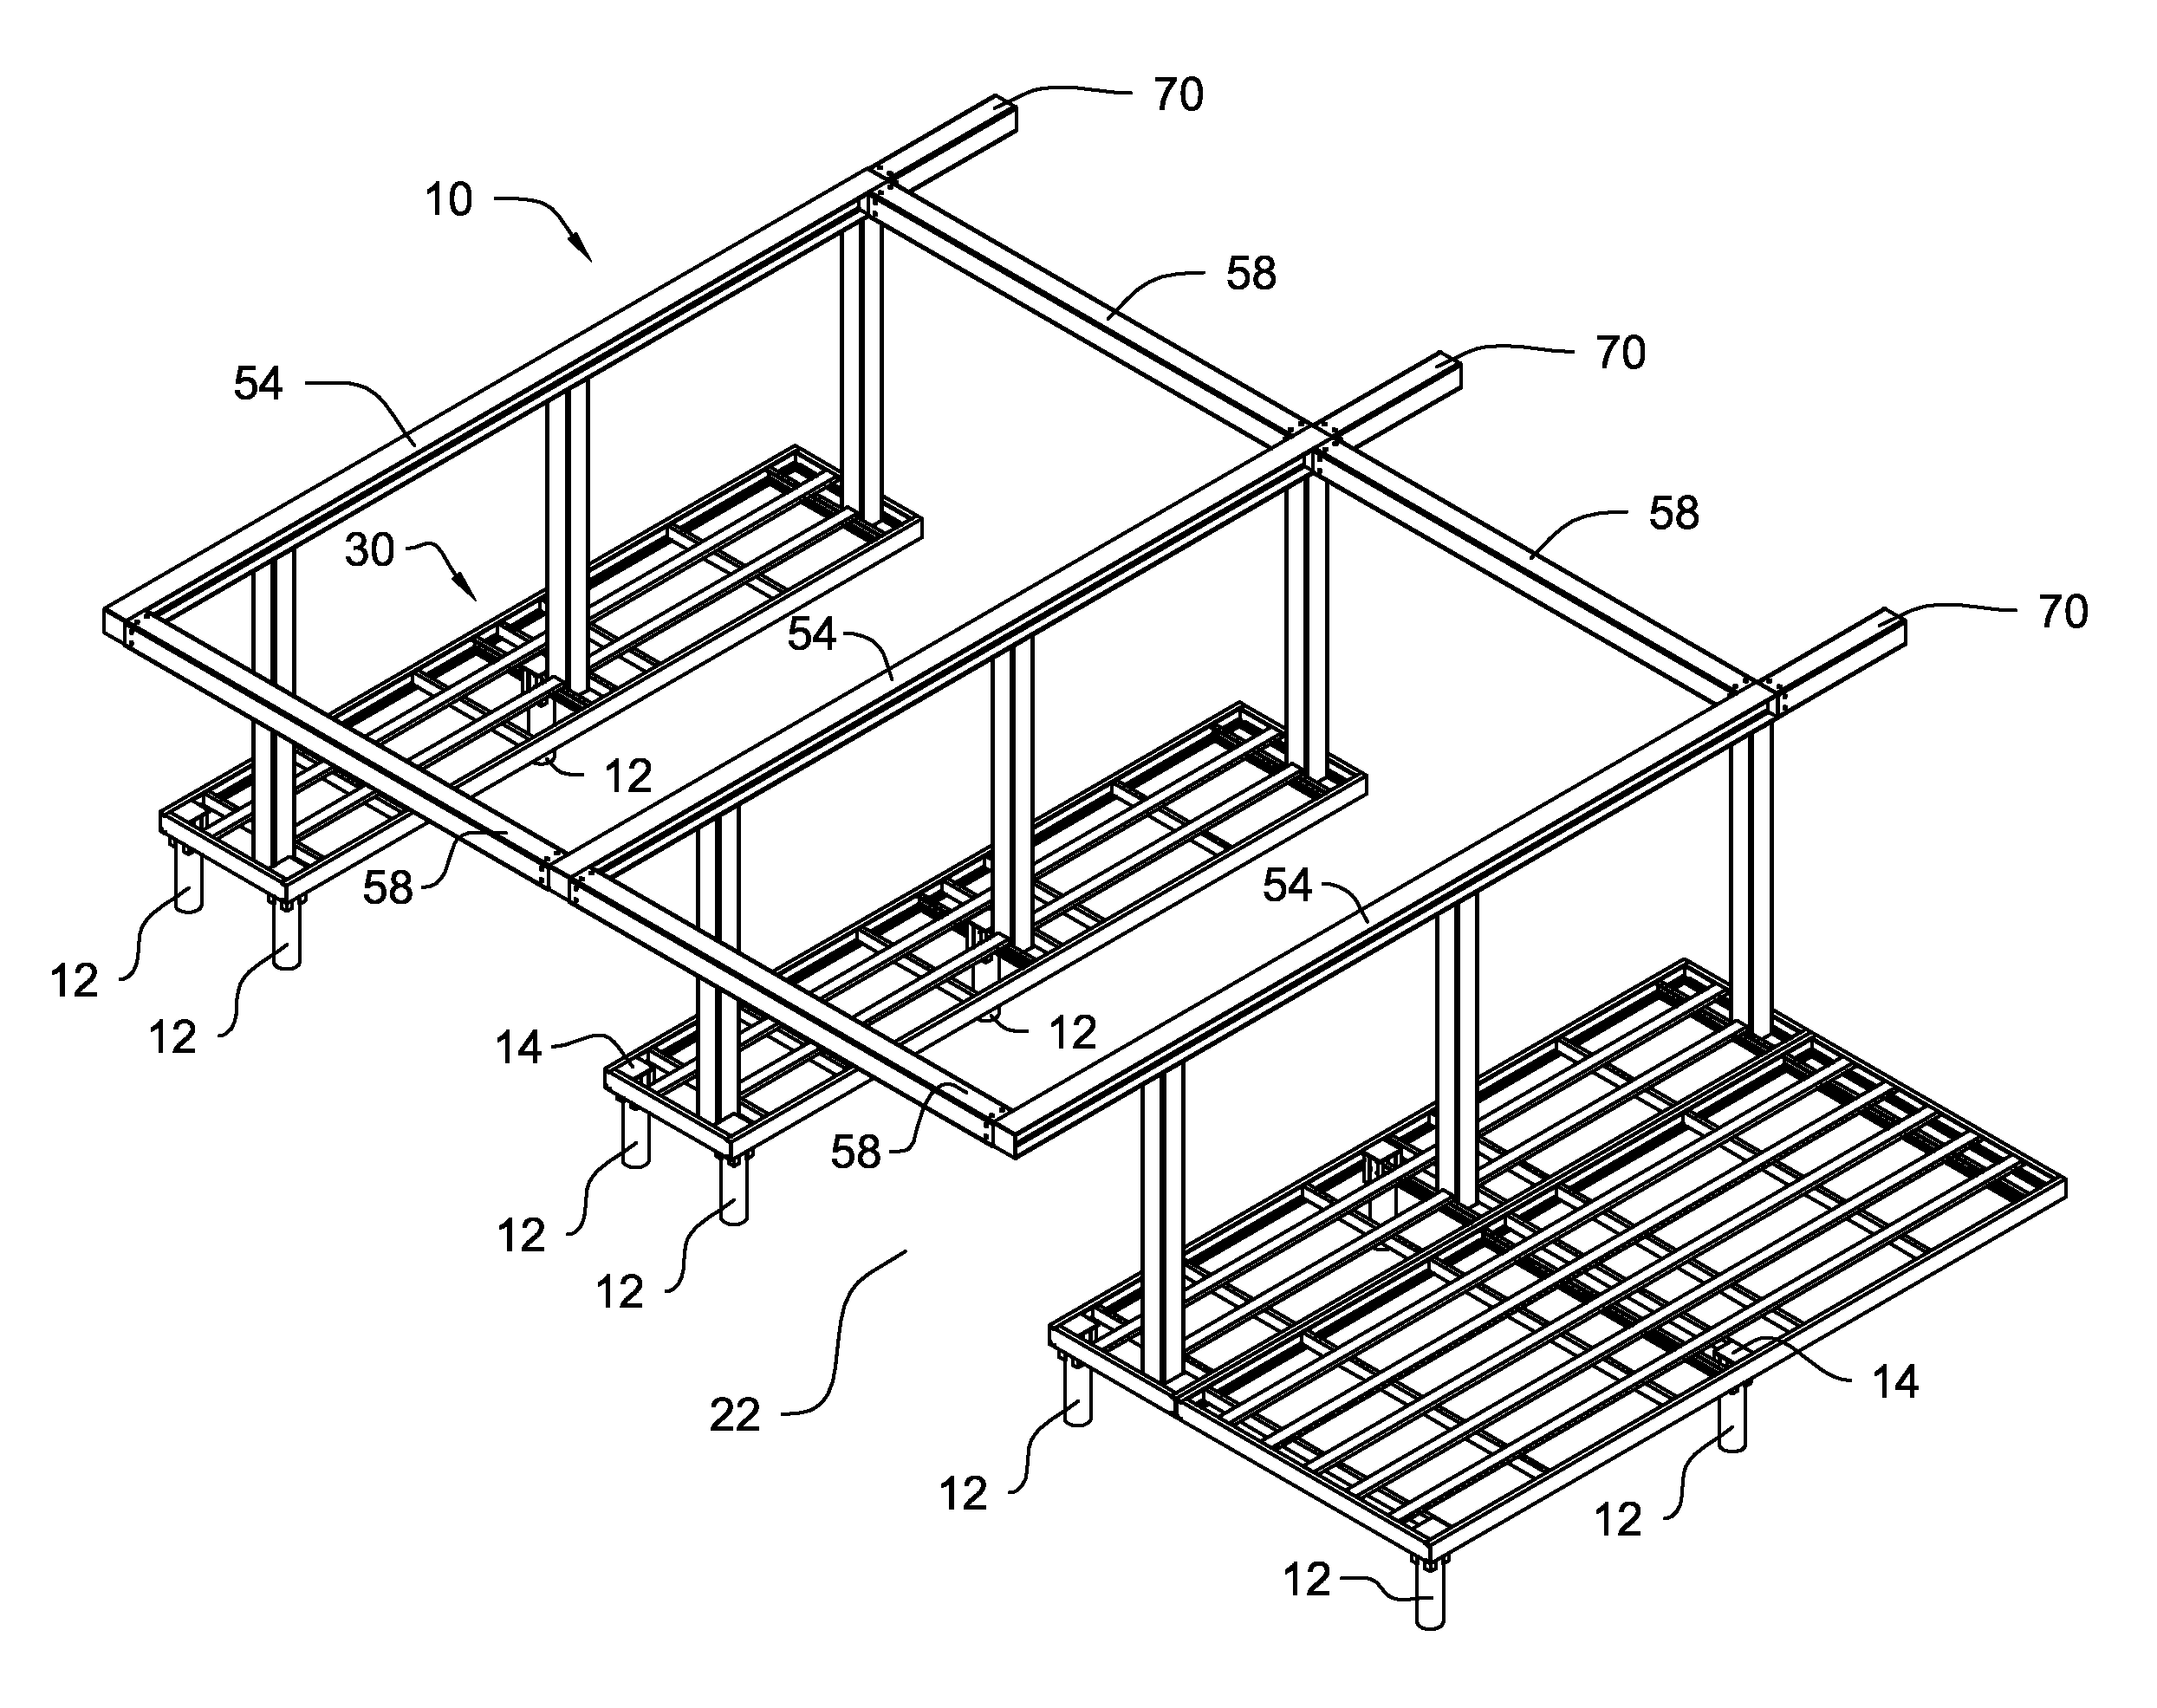 Pre-fabricated modular boat dock assembly